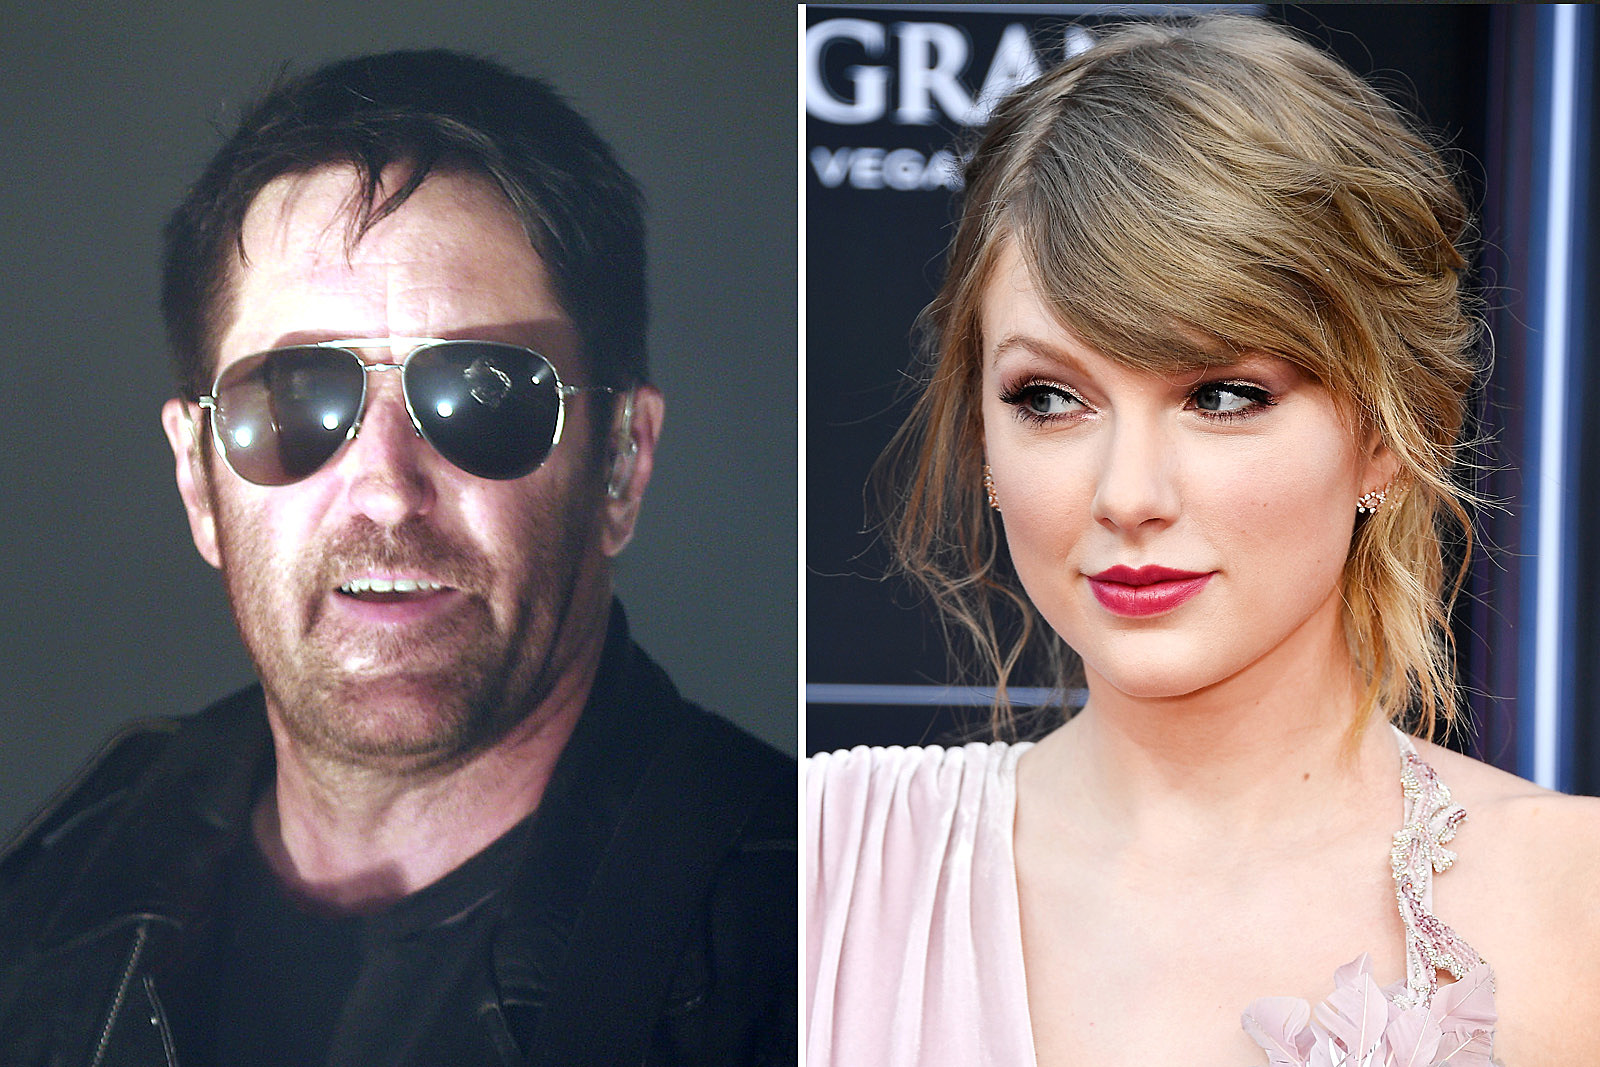 Trent Reznor Slams 'Taylor Swifts' Who Keep Politics Out of Music